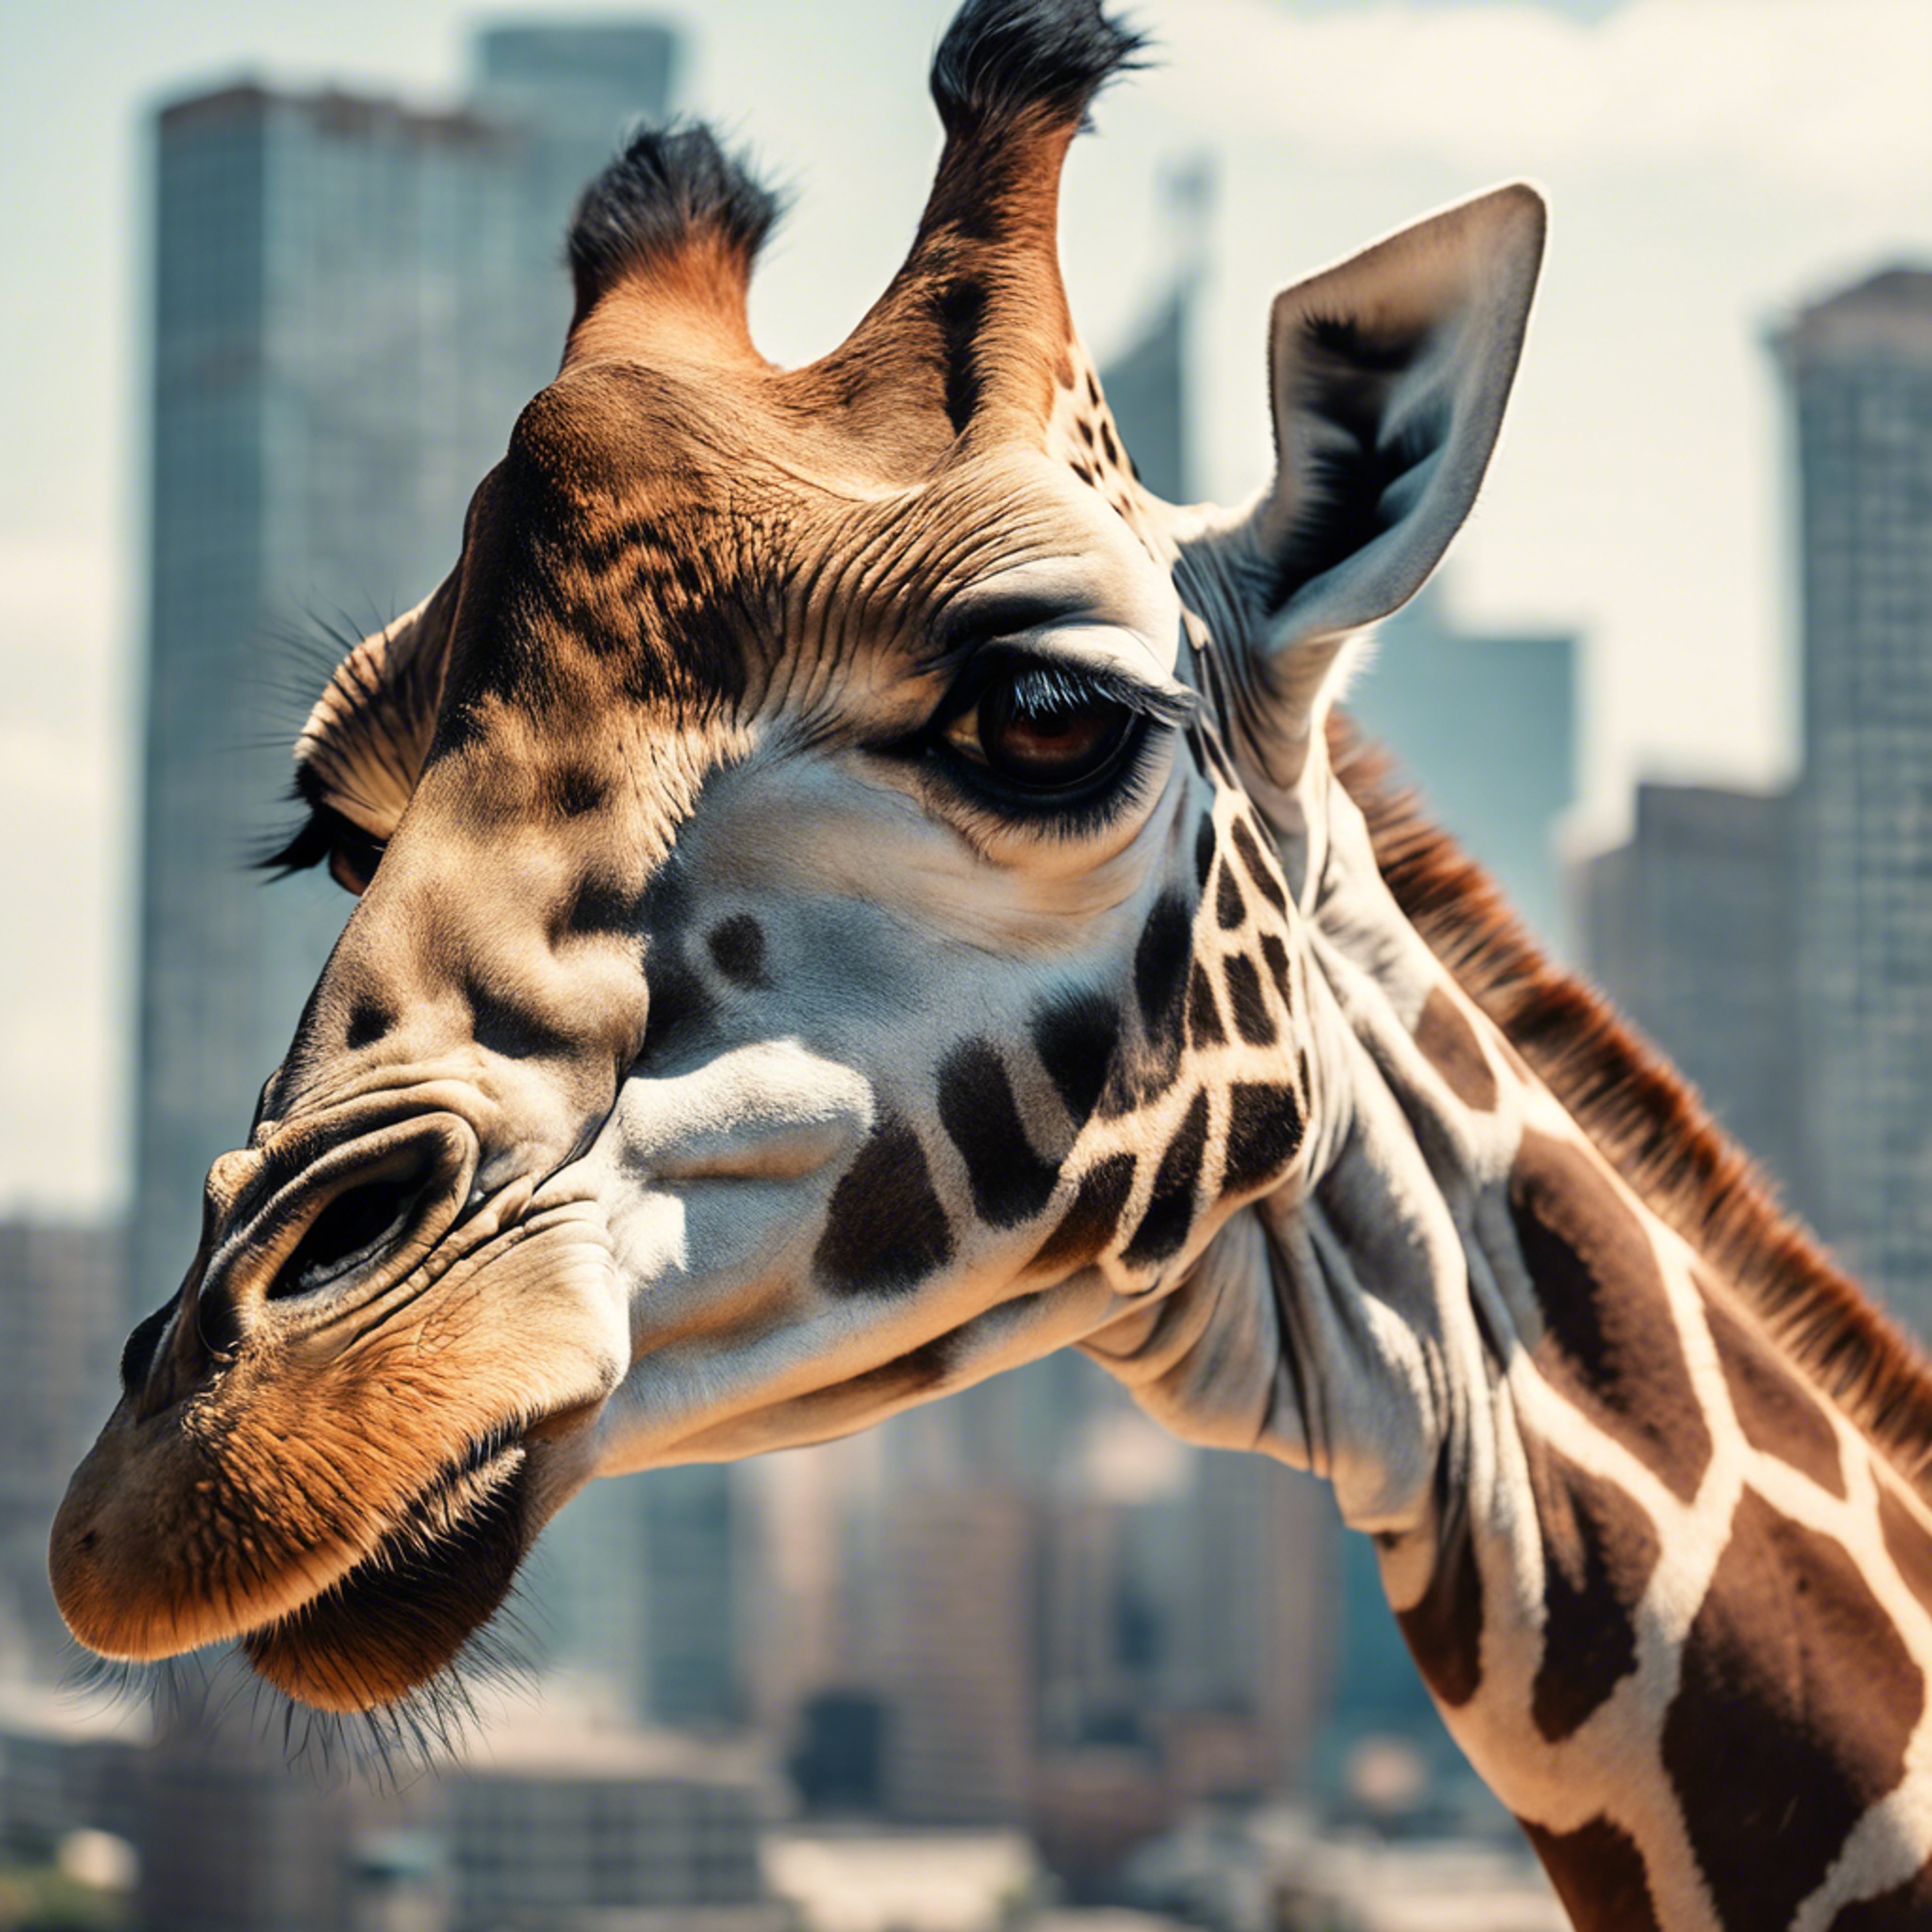 Illustration of a giraffe with a cityscape reflected in its eye.壁紙[07df3c2b5cb24fb9a513]